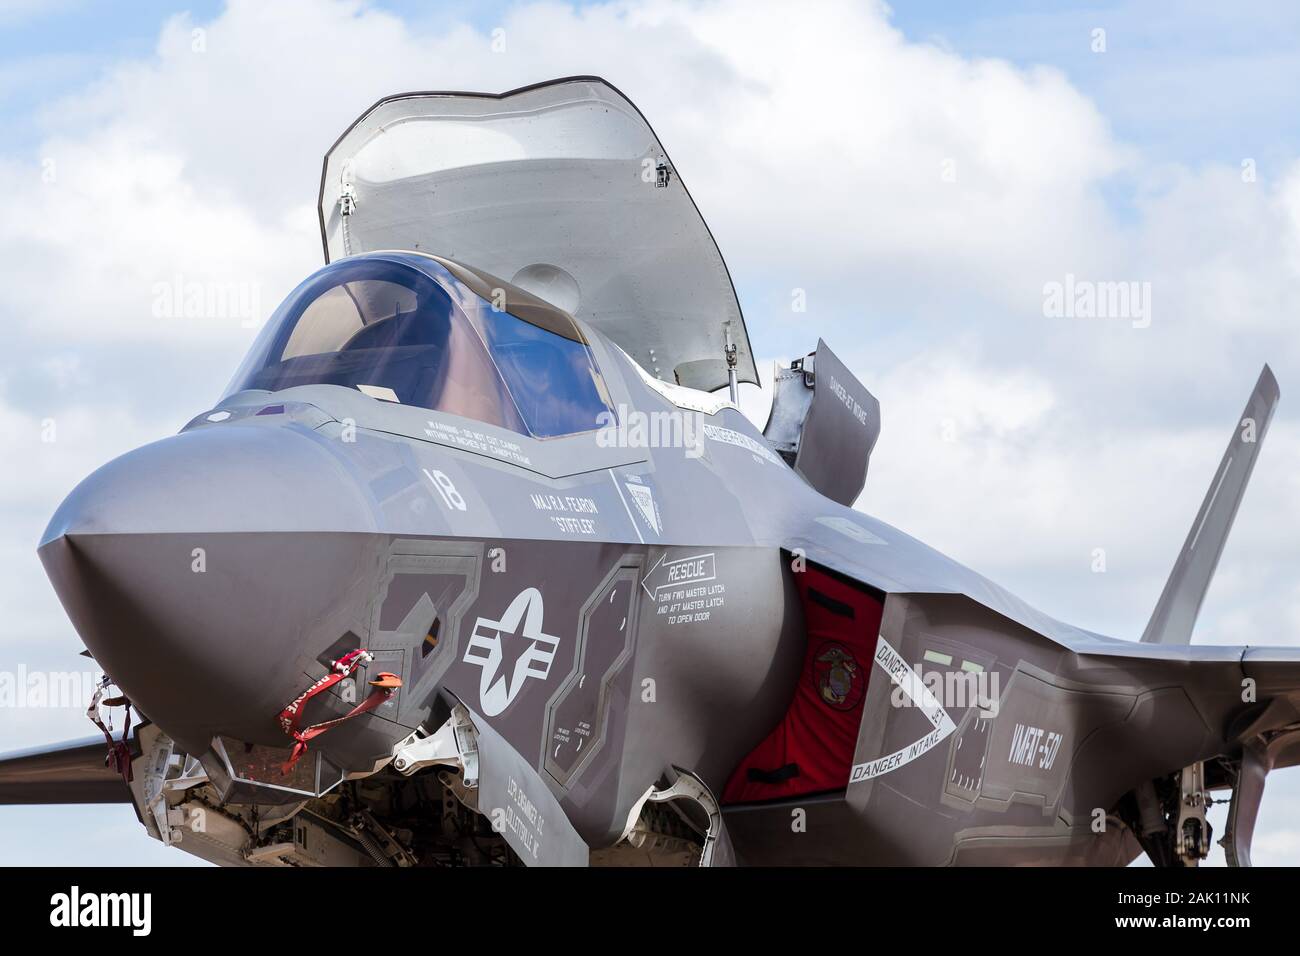 Looking up at an F-35B stealth fighter in July 2016 seen at the Royal International Air Tattoo, Gloucestershire in England. Stock Photo